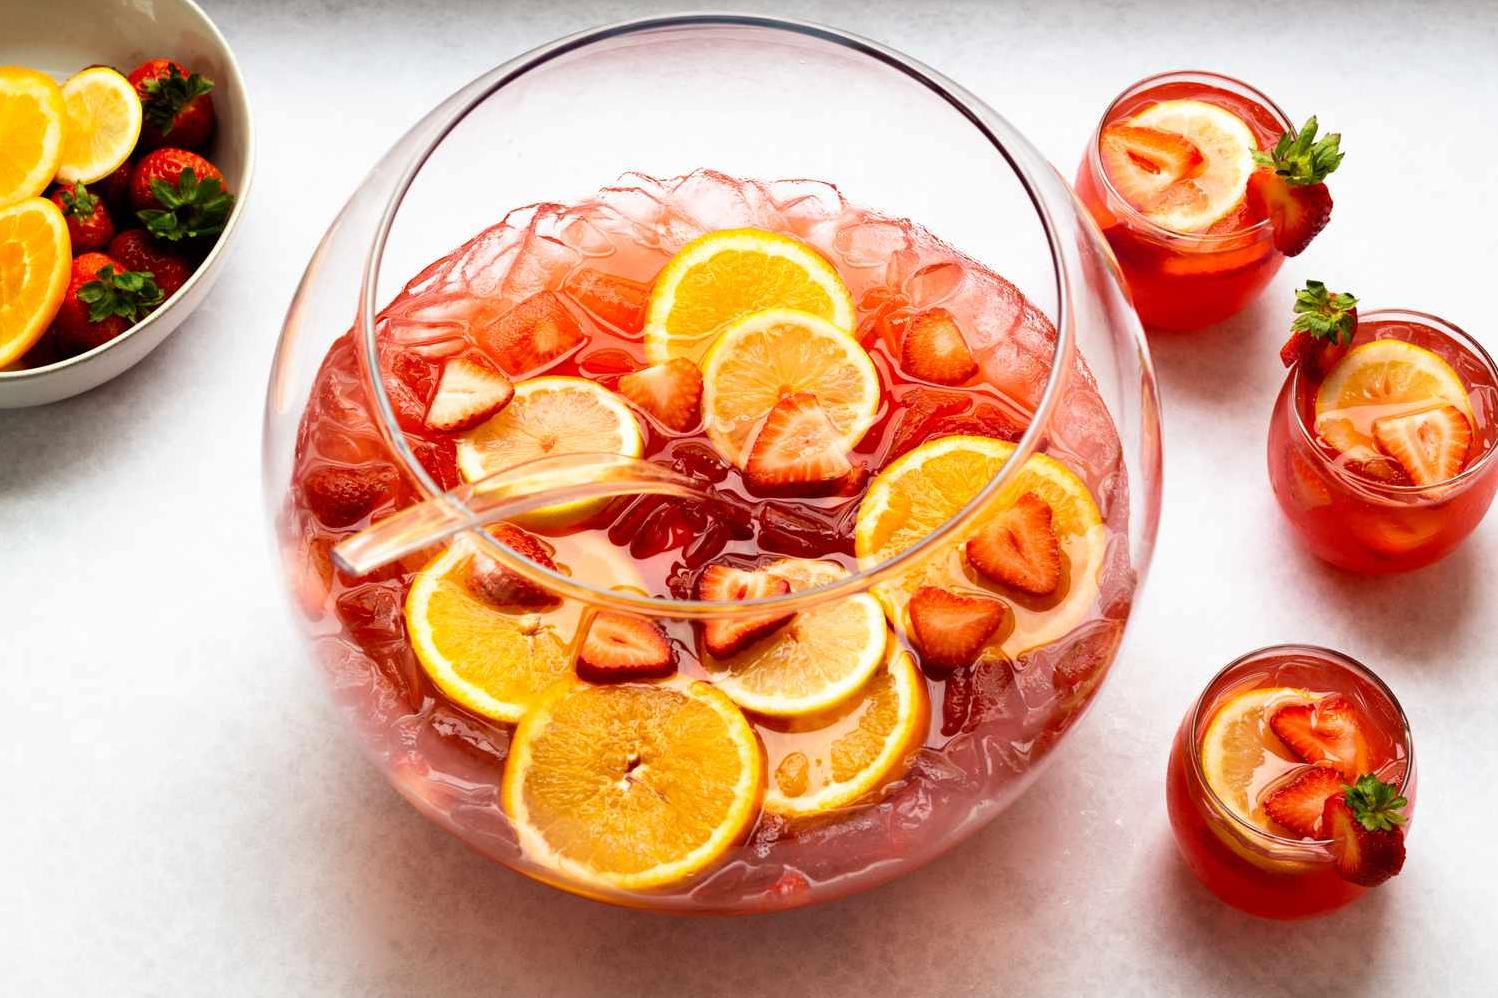  Don't let the pink hue fool you, this punch is bursting with bold flavors.